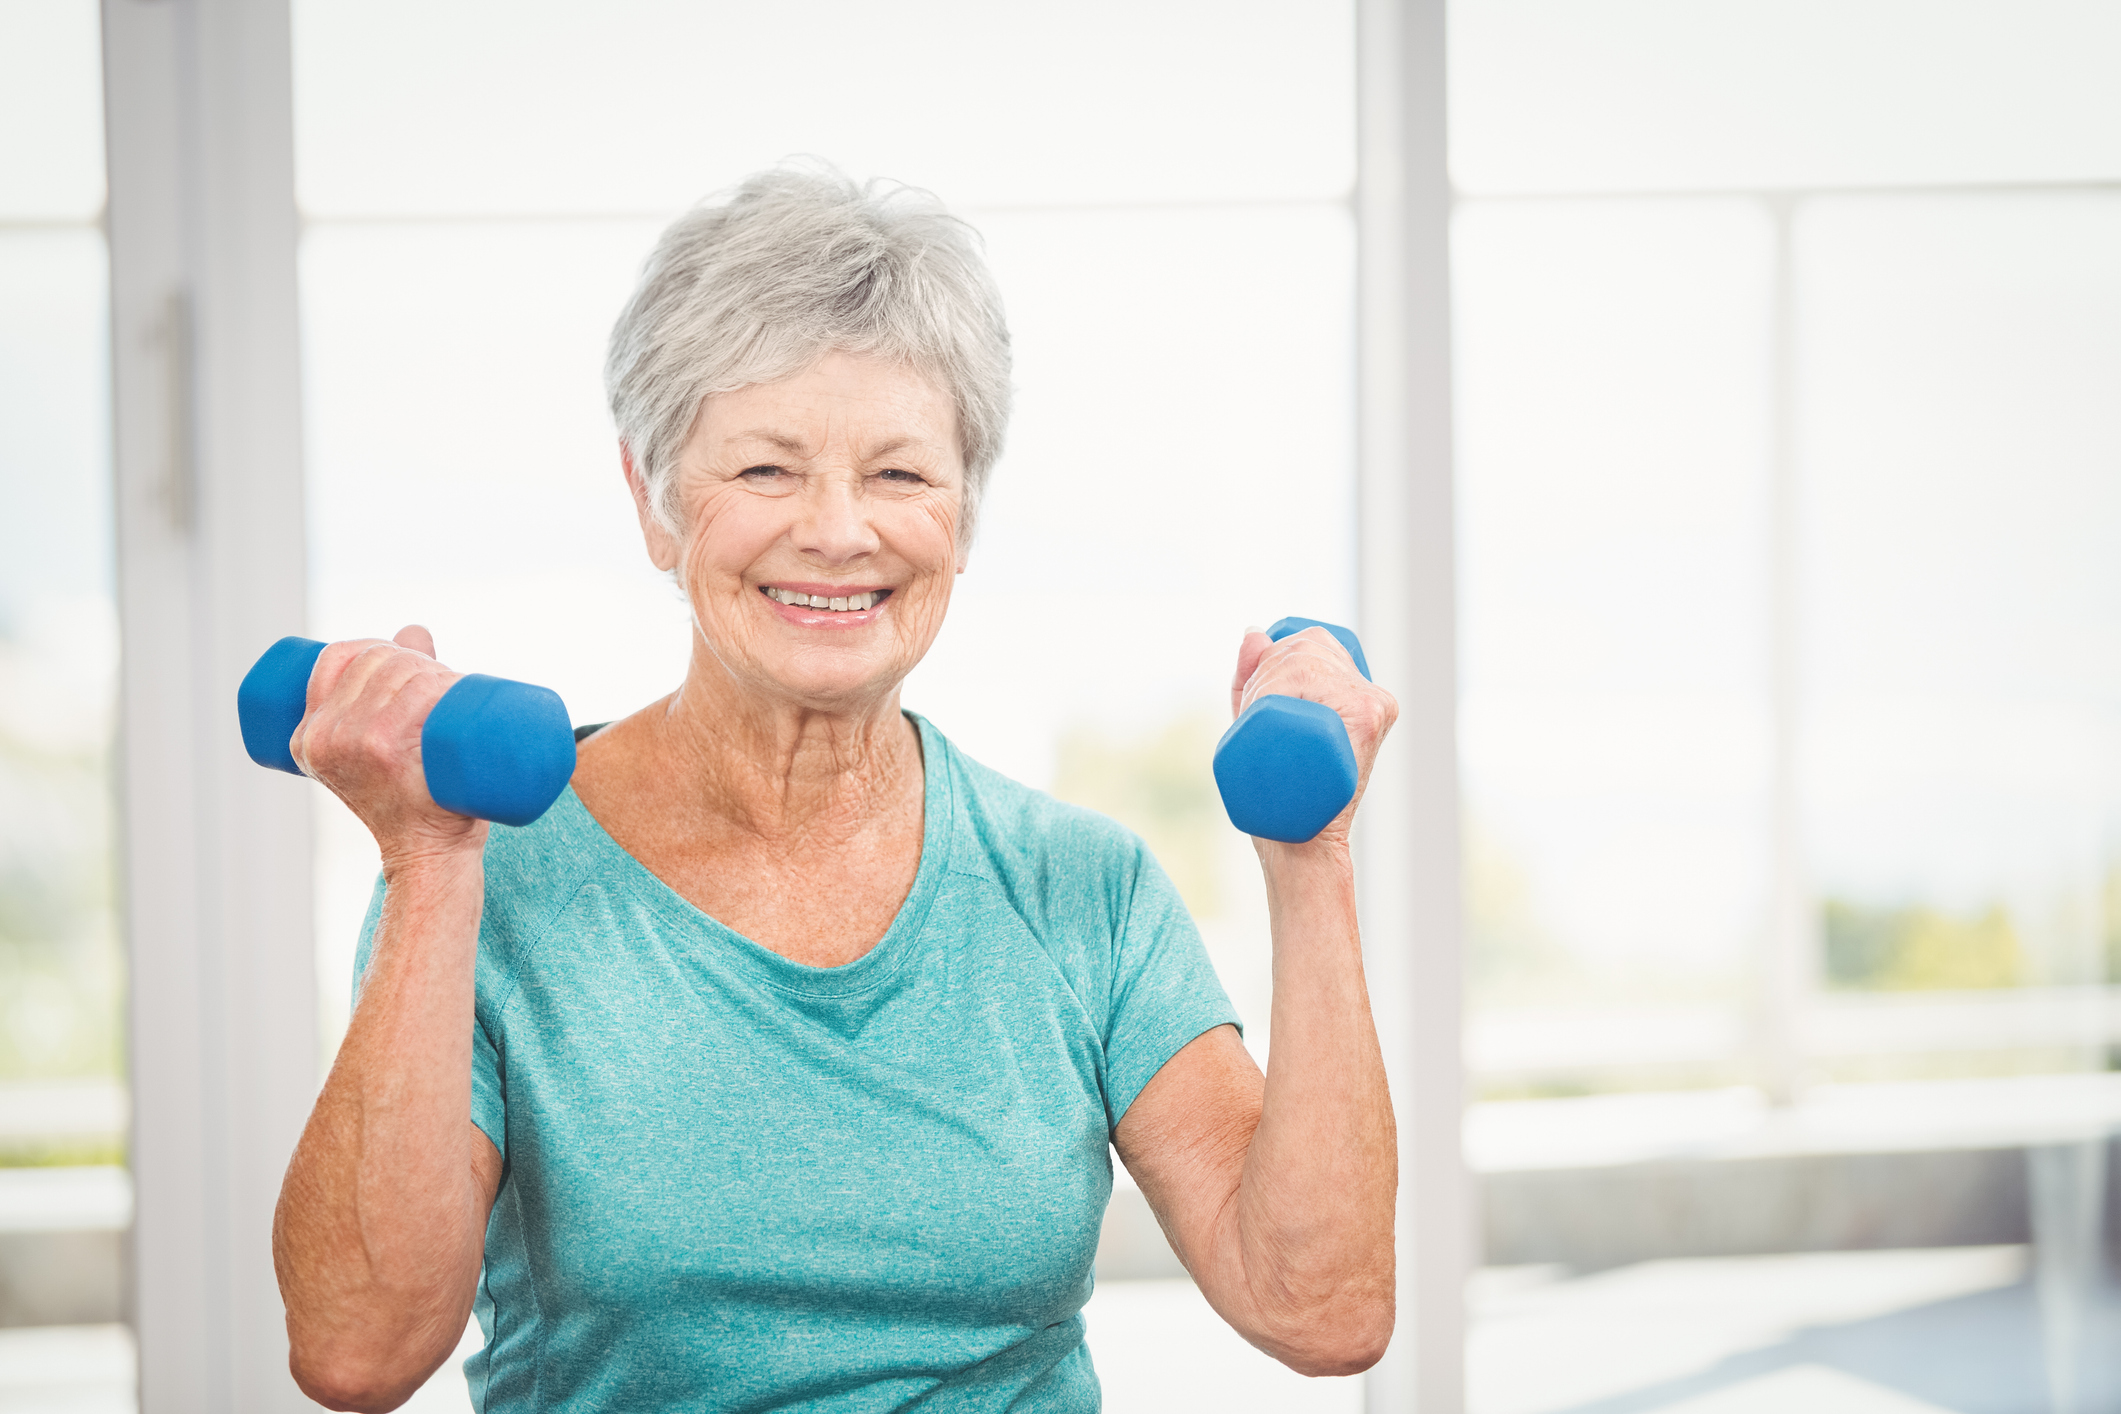 Portrait of happy senior woman holding dumbbell at home